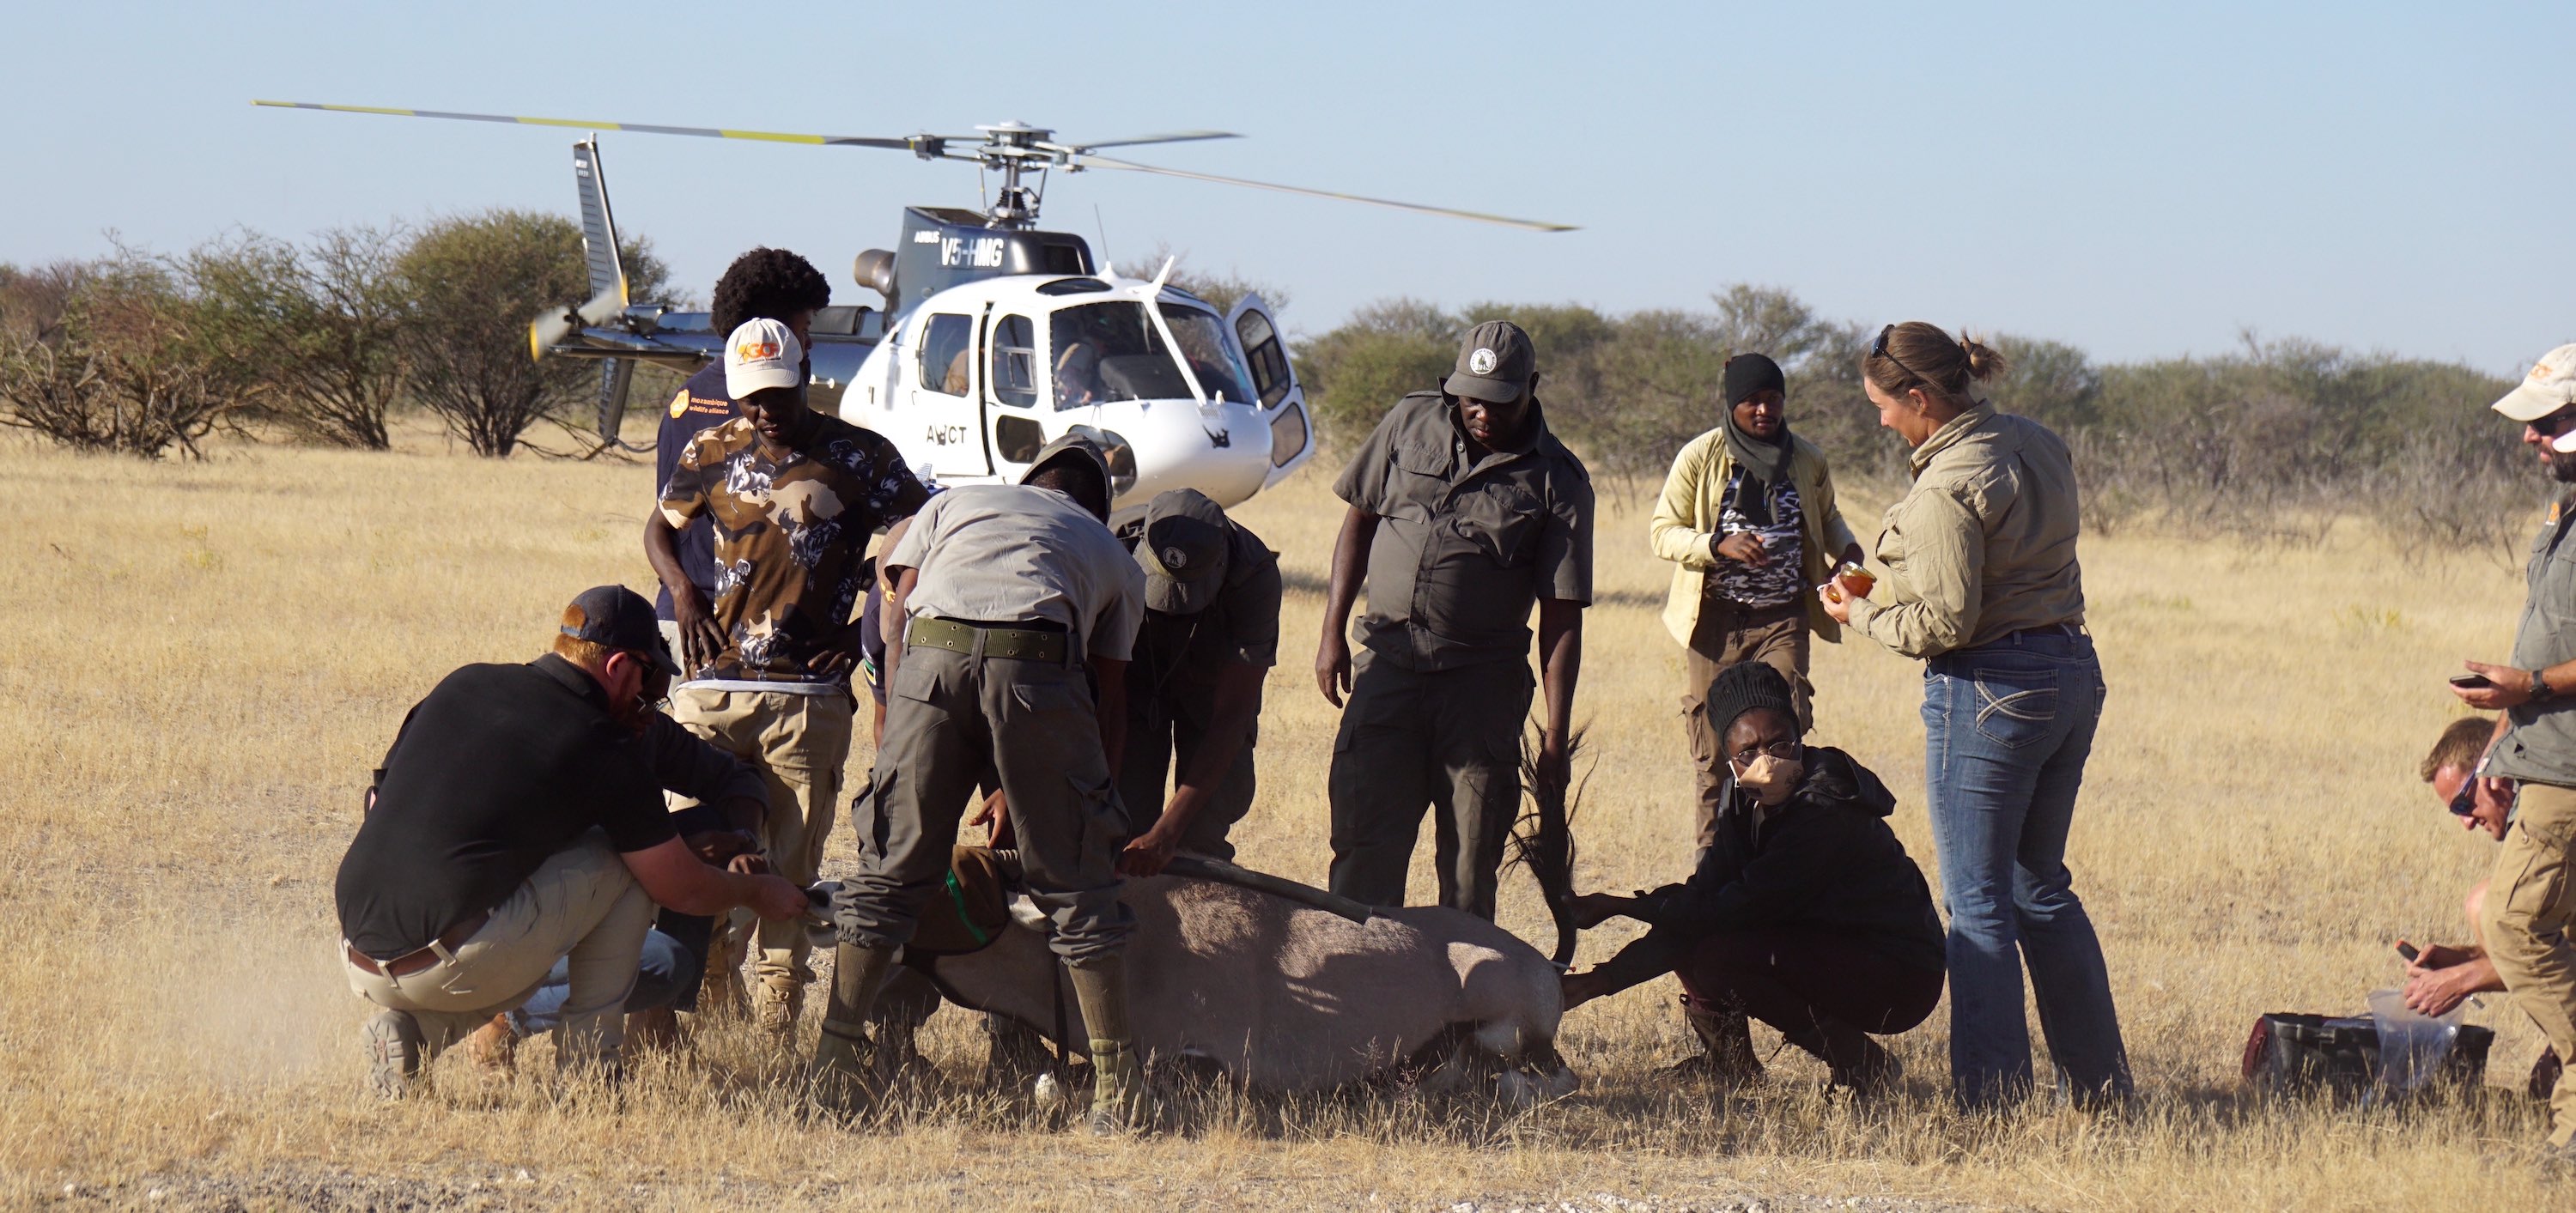 A group of vets cluster around an unconscious gensbok, while a helecopter is parked in the background.